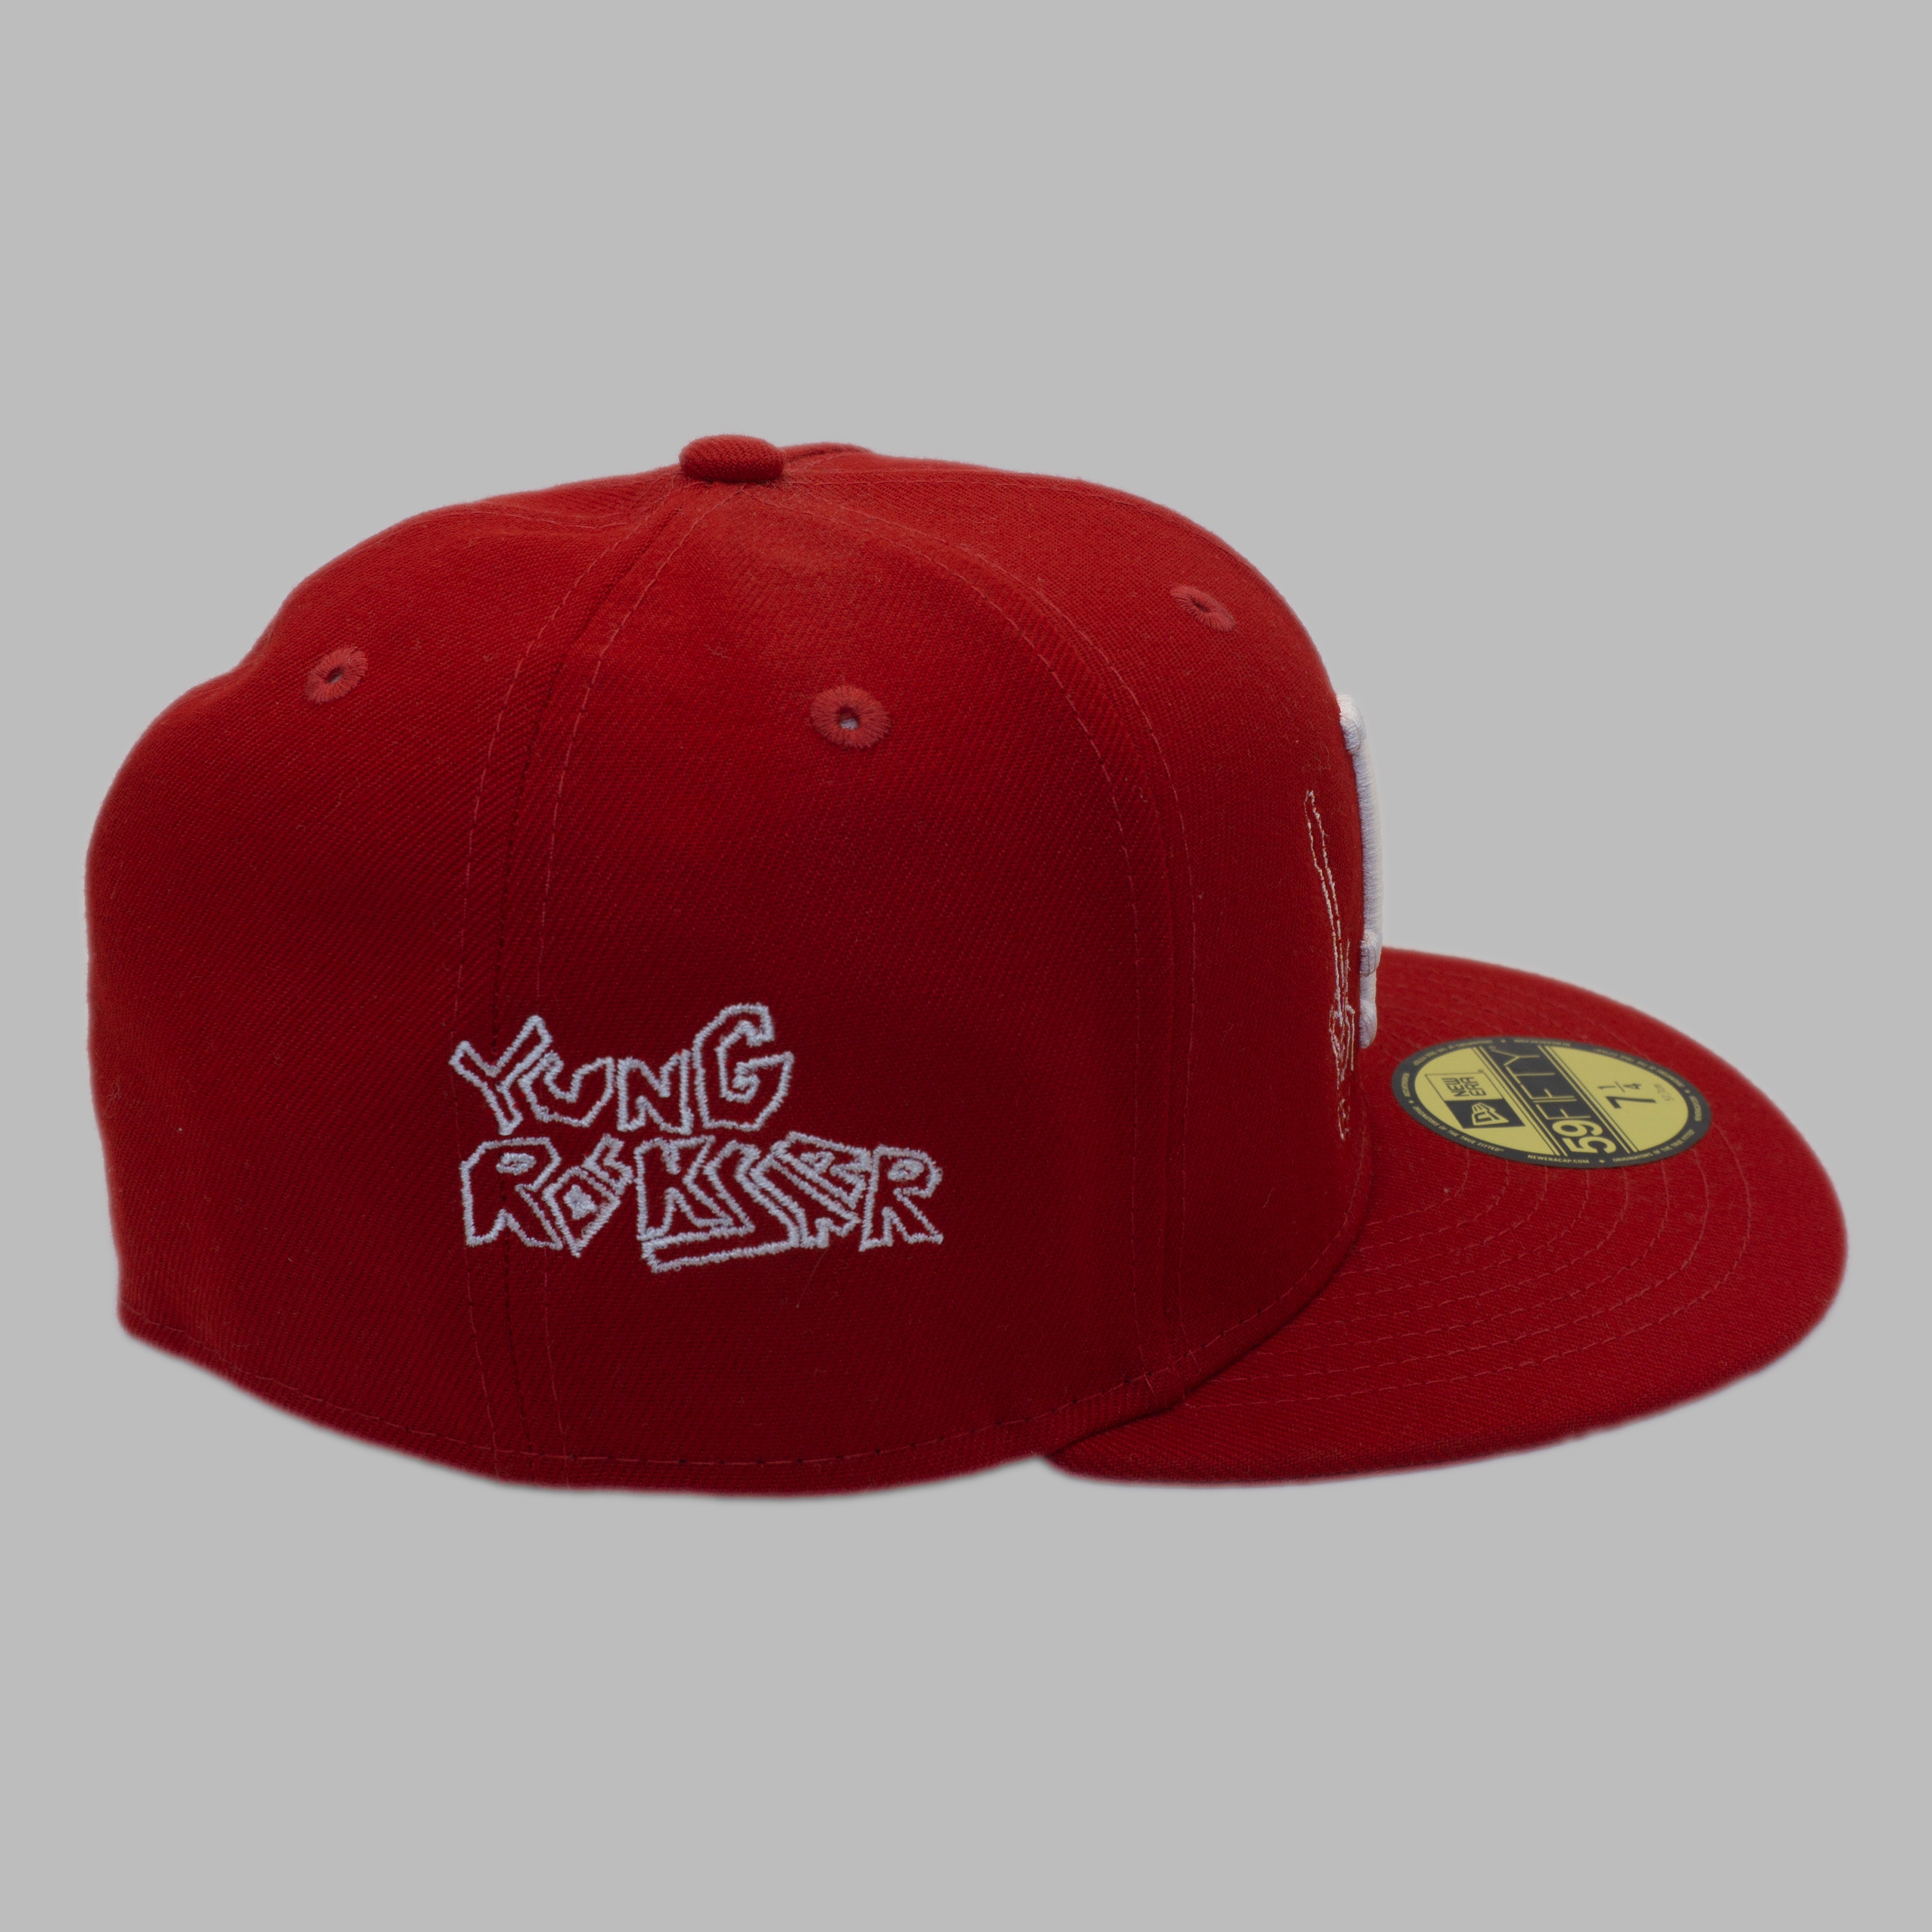 RED ROCKSTAR FITTED (7 1/2)